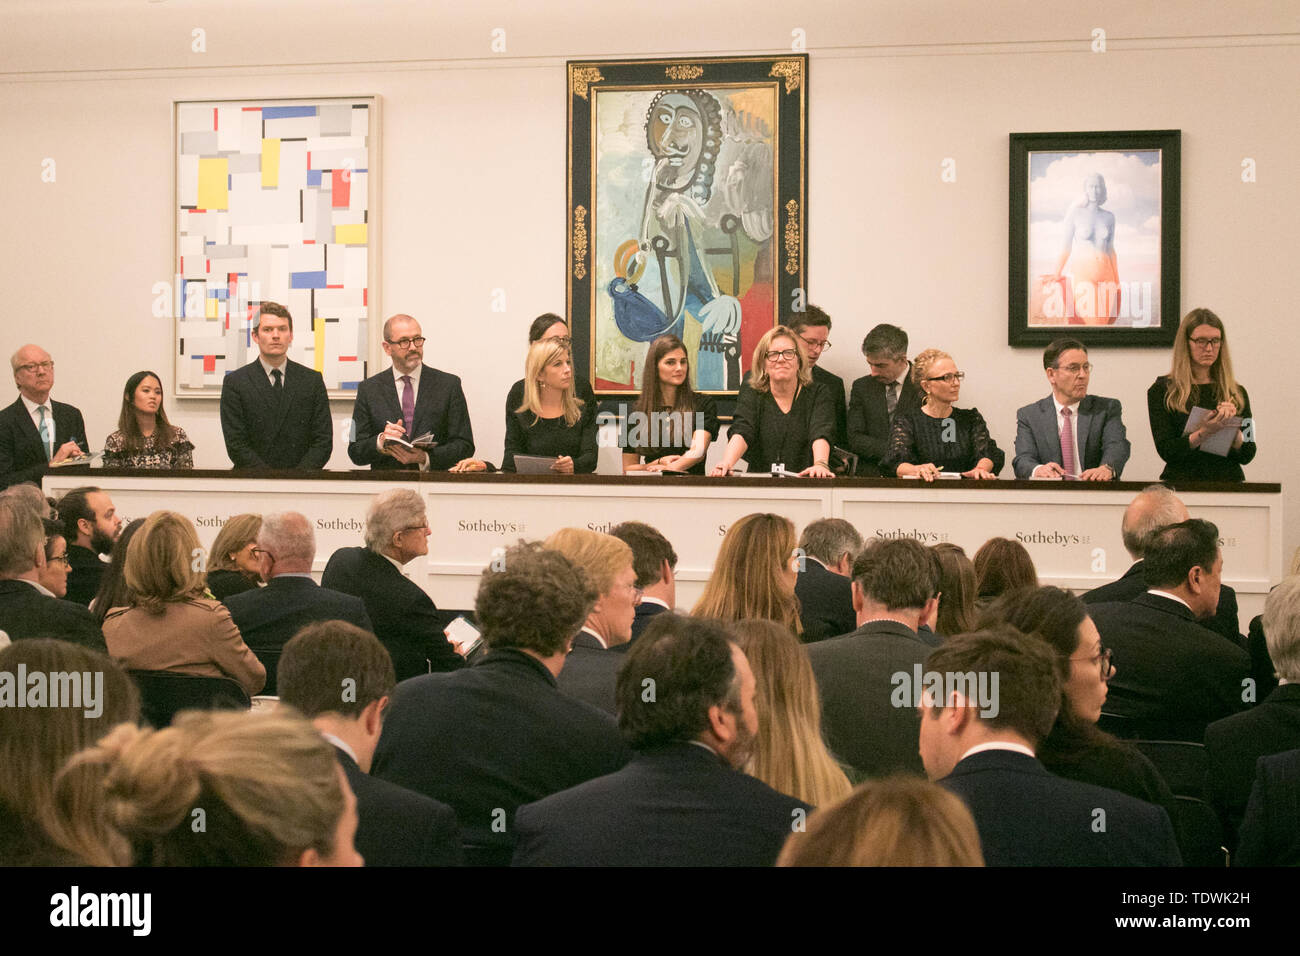 London UK. 19th June 2019. 'Sotheby's staff taking bids  for  L-R 'Relational Painting No 60 by Fritz Glamer, oil on canvas, Estimate £450,000 which sold at hammer for £620,000;'Homme a la pipe by Pablo Picasso, Estimate £5,500,000 m which sold at hammer for £6,500,000m; 'La magie noire, oil on canvas  by René Magritte, Estimate £2,500,000 which sold at hammer for £3,500,000 at the Impressionist & Modern Art Evening Auction  at Sotheby’s London London Credit: amer ghazzal/Alamy Live News Stock Photo